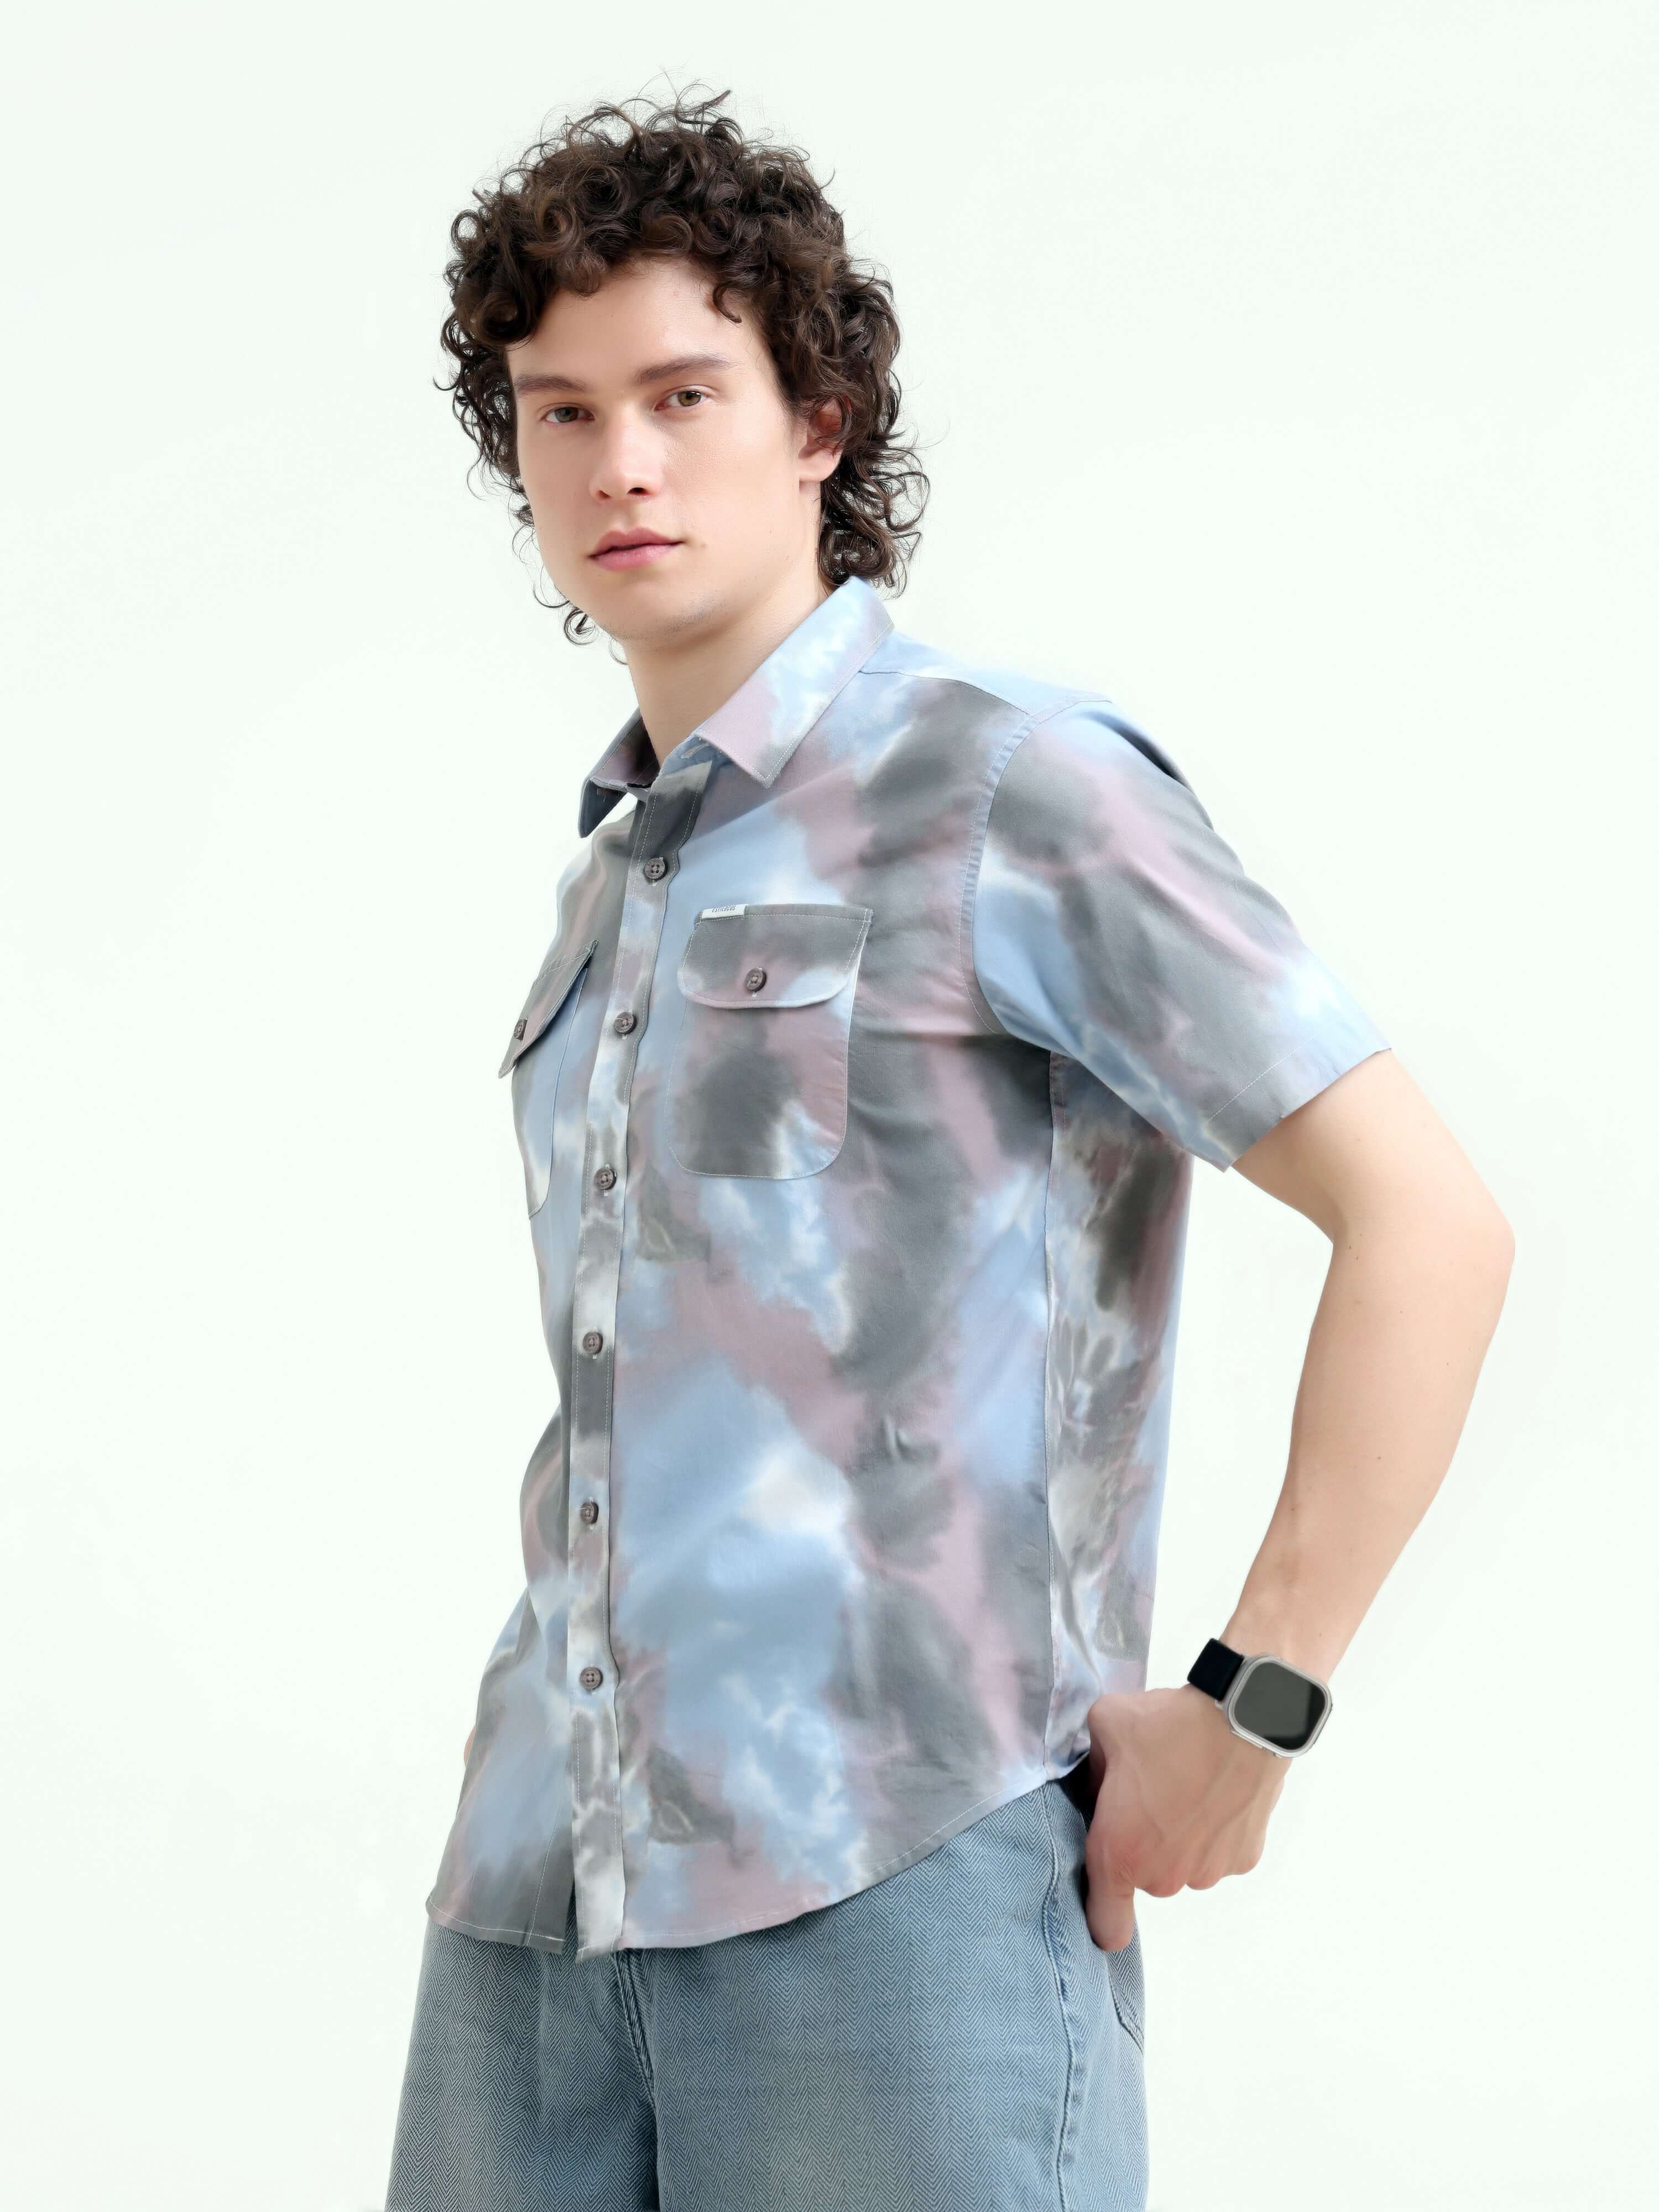 Pastel Blue Watercolor Shirt - New Men's Summer Fashion shop online at Estilocus. Elevate summer style with our pastel blue shirt, featuring unique watercolor prints. Perfect for a casual yet artistic look. Shop now!